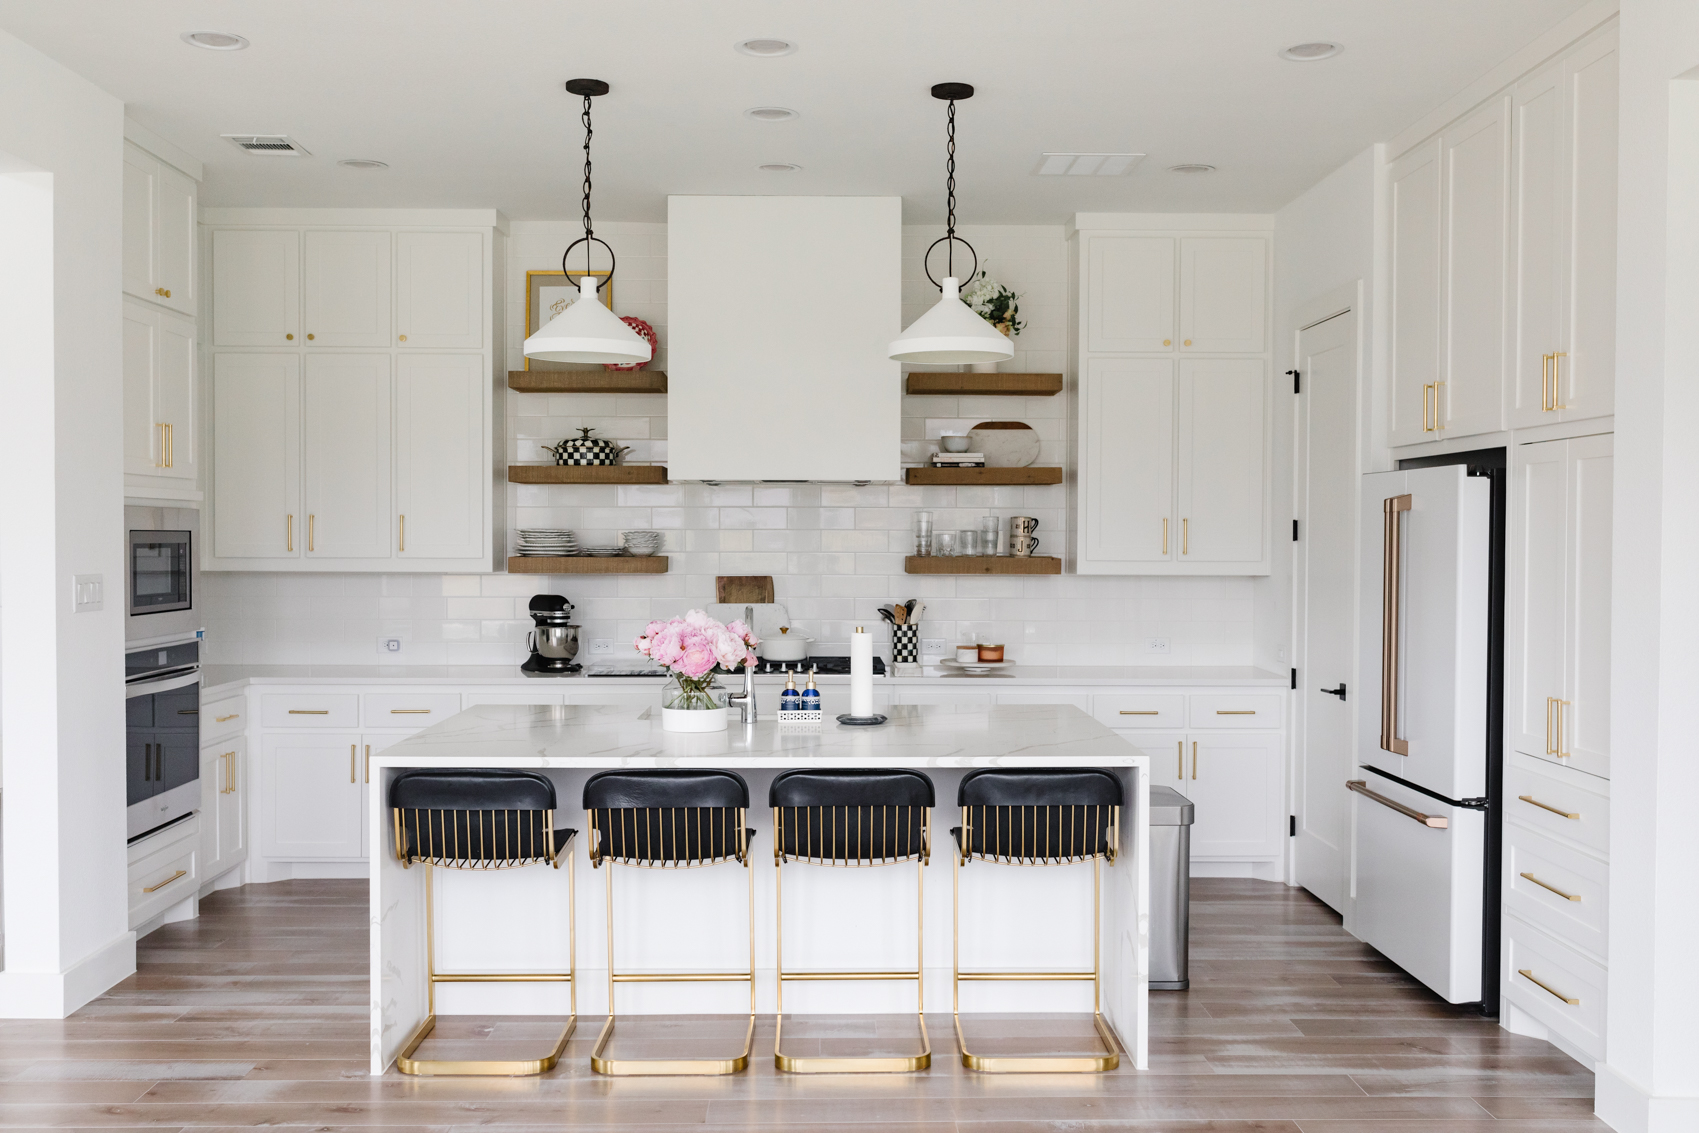 Black and white transitional kitchen in a one-story home in Dallas with McGee & Co Limoges pendants, Cafe Appliances Refrigerator, CB2 Rake Barstools and more